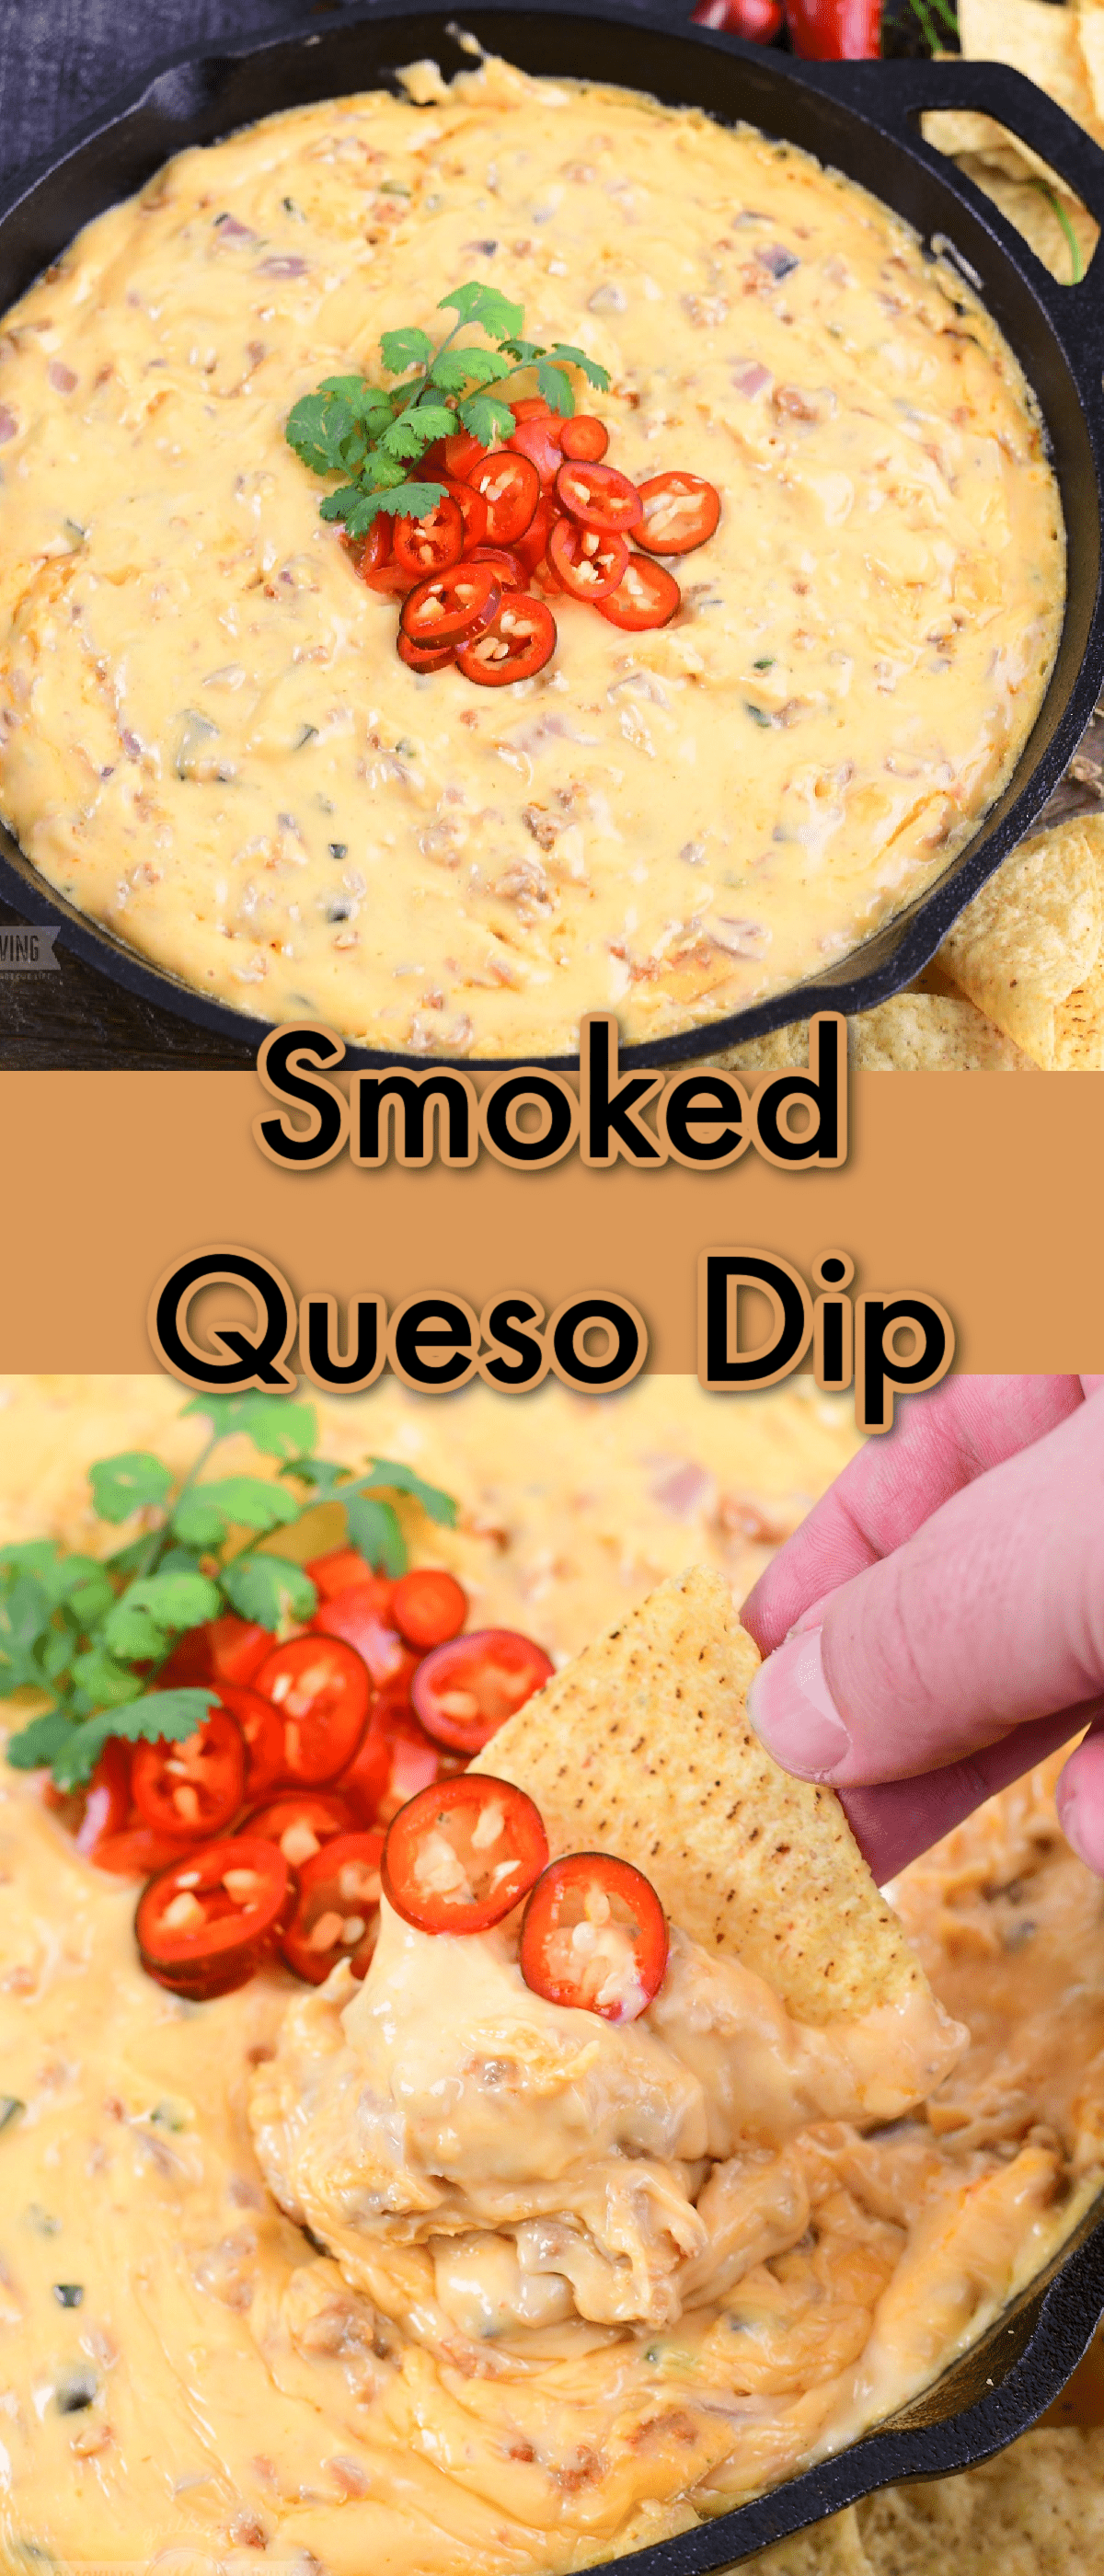 Collage of two close up images of queso dip